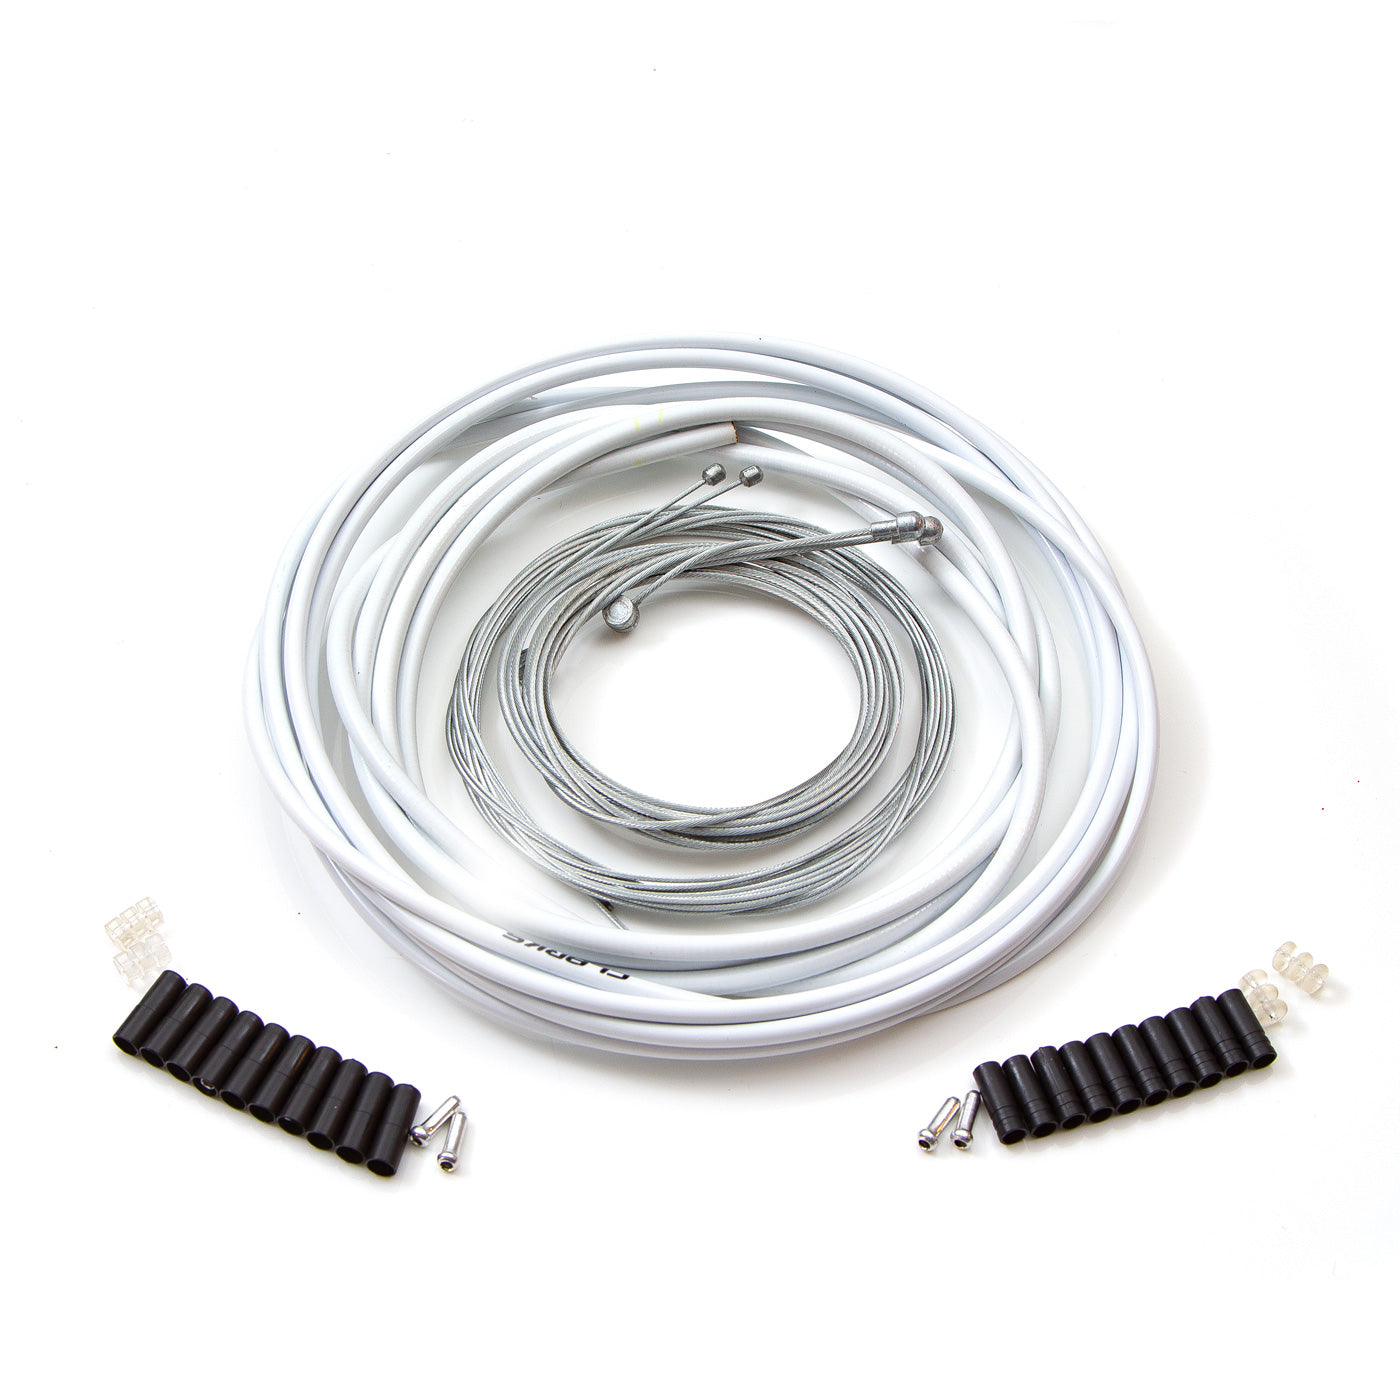 View Clarks Stainless Steel Universal Brake Gear Cable Kit White information